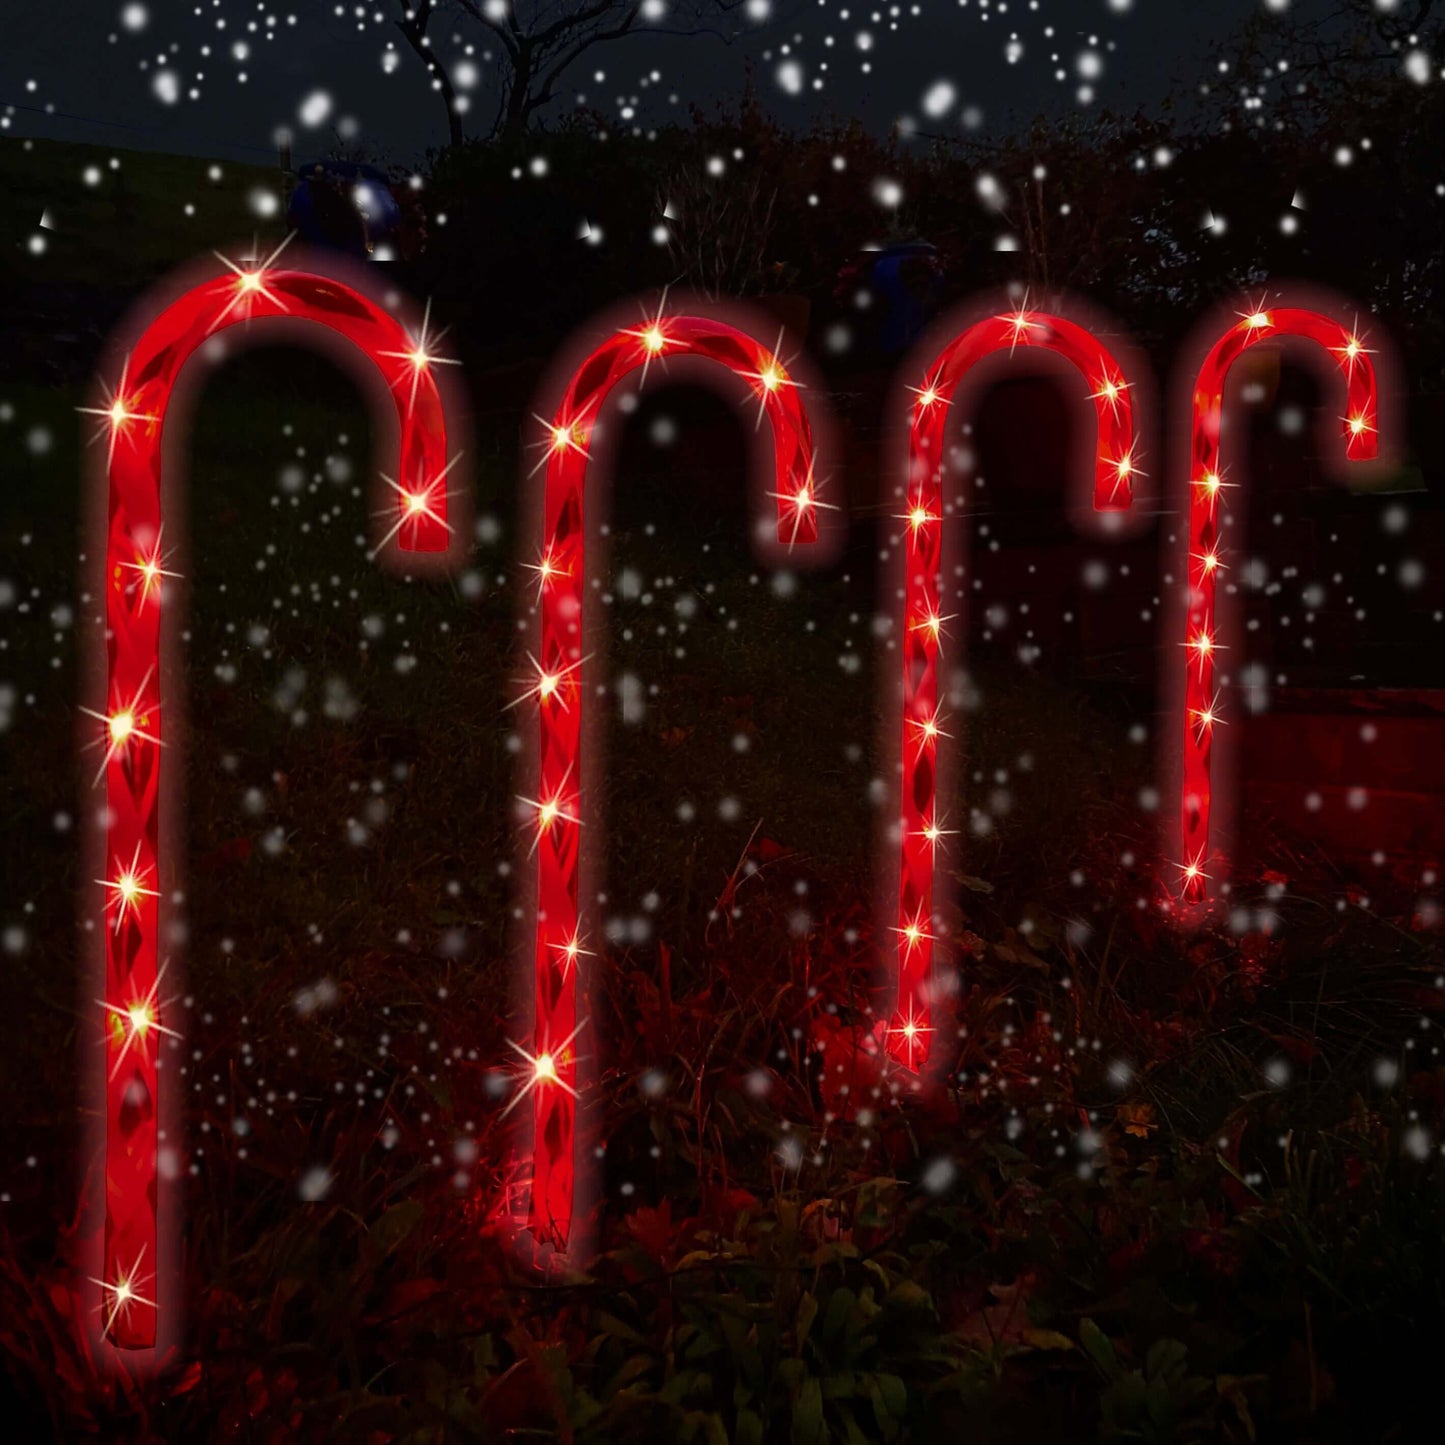 Christmas Four Piece 73cm Candy Cane Pathway Lights with 40 LED's - Red or Multi-Coloured.